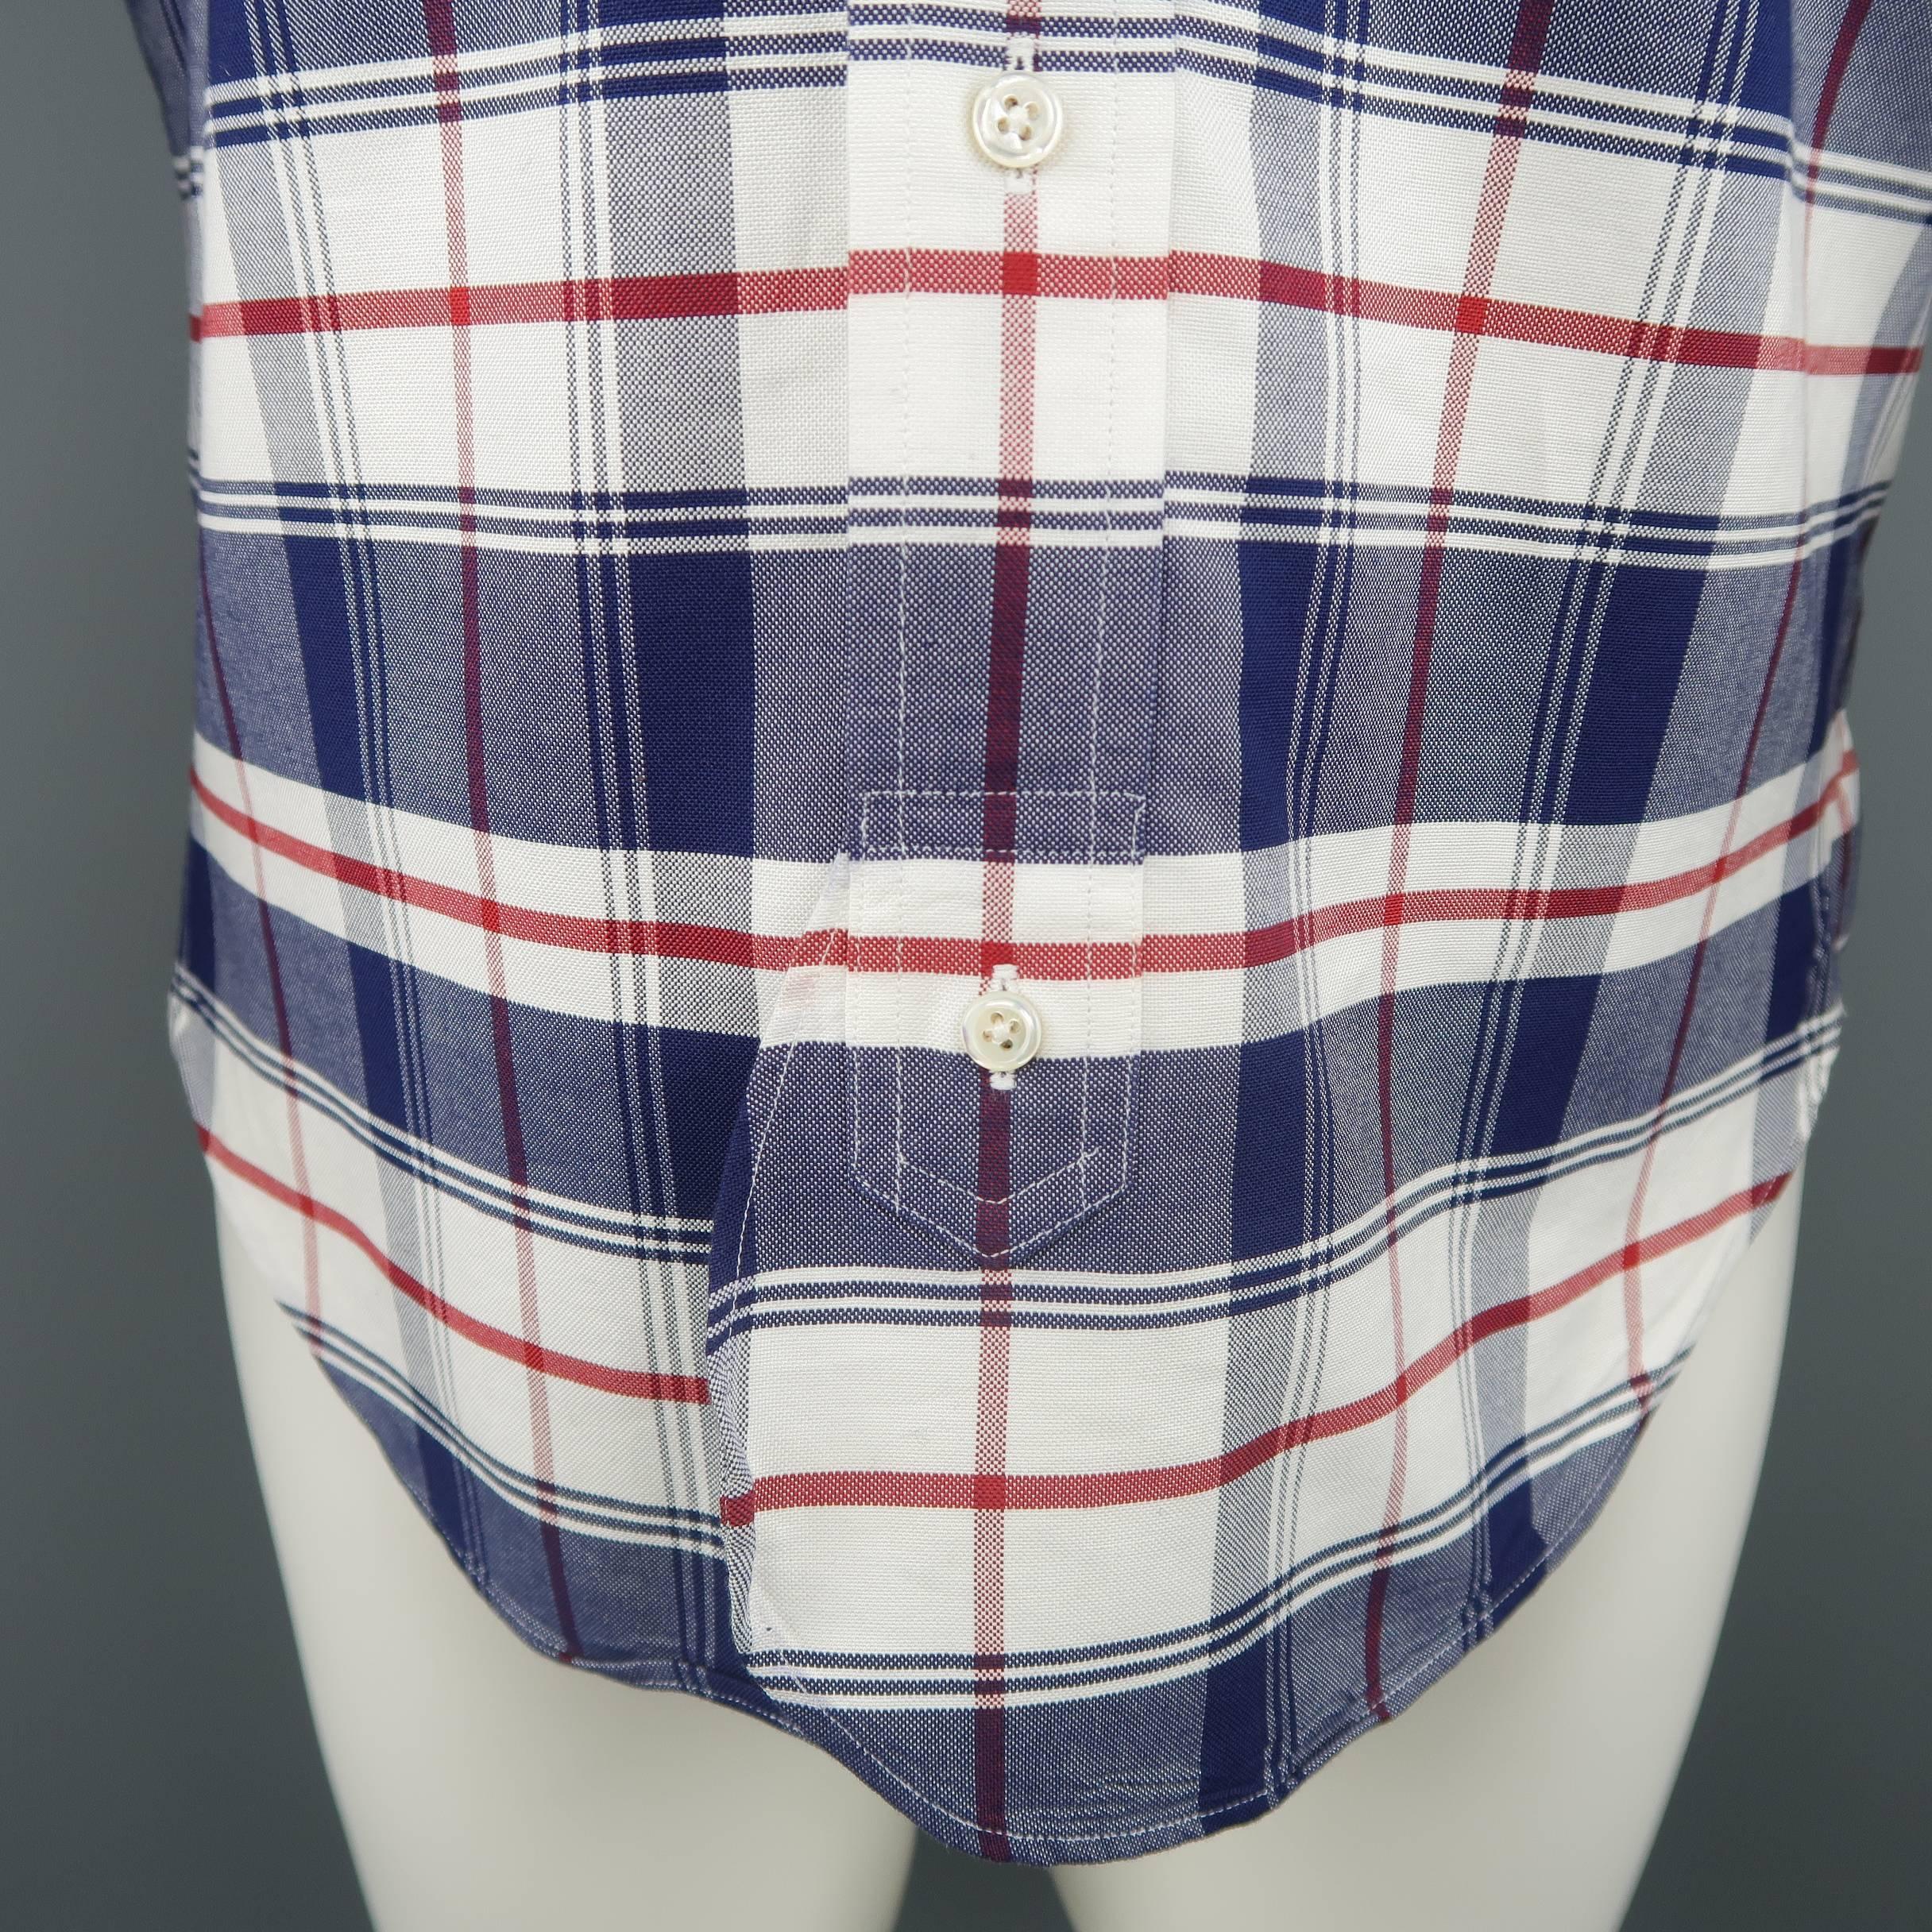 BLACK FLEECE by THOM BROWNE shirt comes in navy blue. white, and red plaid print cotton with a pointed button down collar, patch breast pocket, curved hem detail, and back tab. Made in USA.
 
Excellent Pre-Owned Condition.
Marked: BB0
